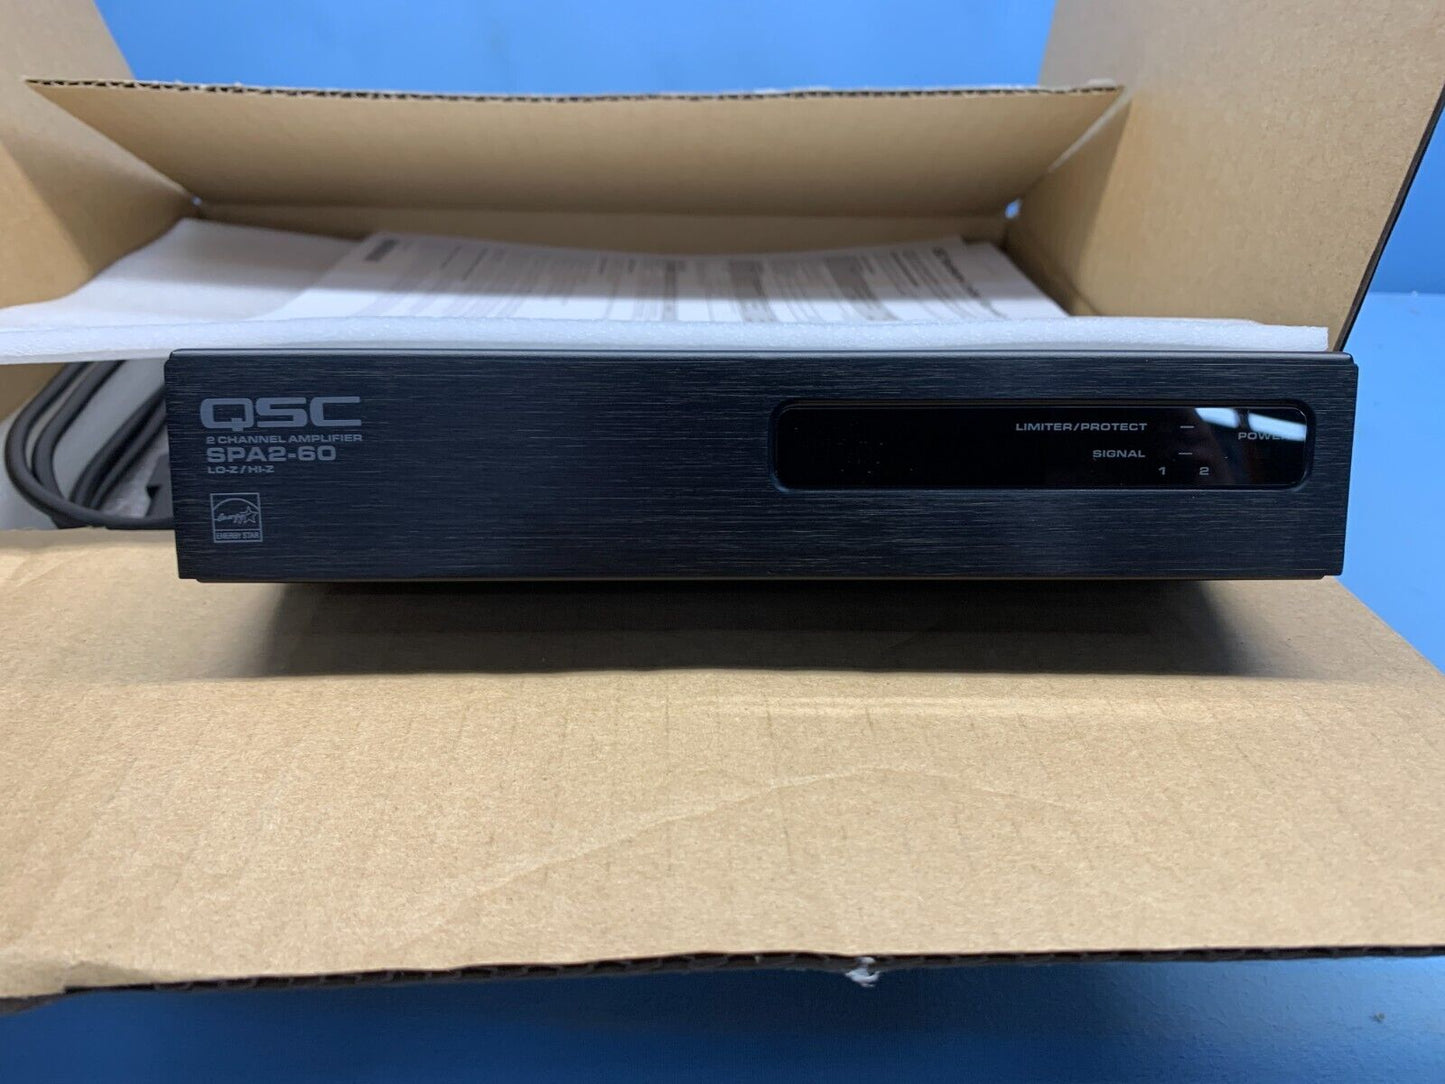 QSC SPA2-60 / FG-00202-00   2-Channel Compact Power Amplifier 60W at 4 Ohm 70V